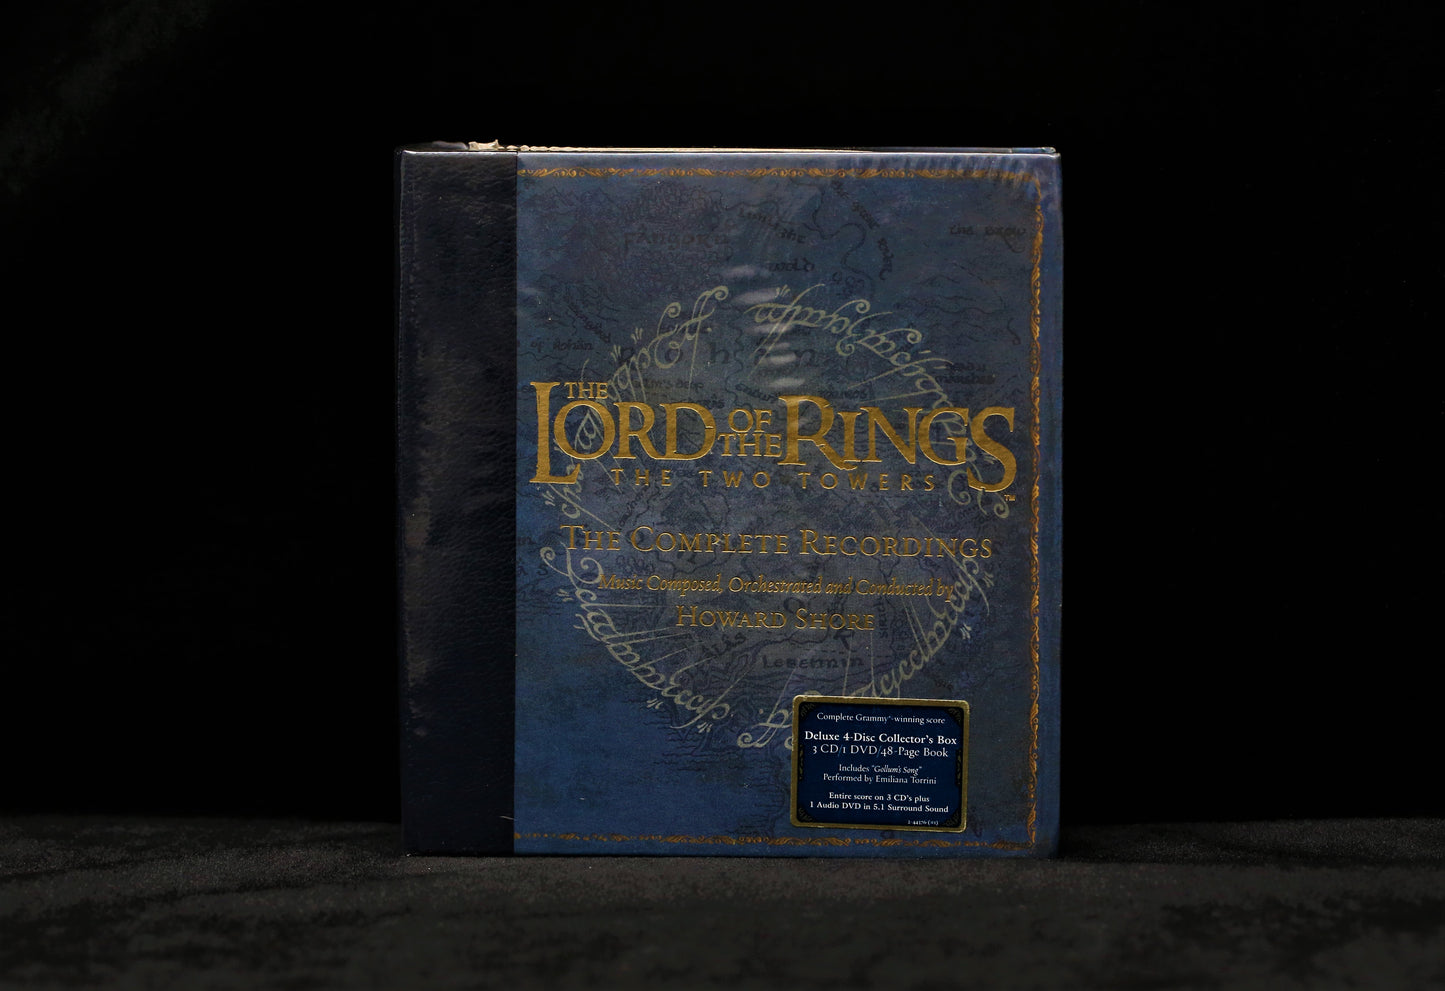 The Lord of the Rings: The Two Towers [2008 Collector's Edition]